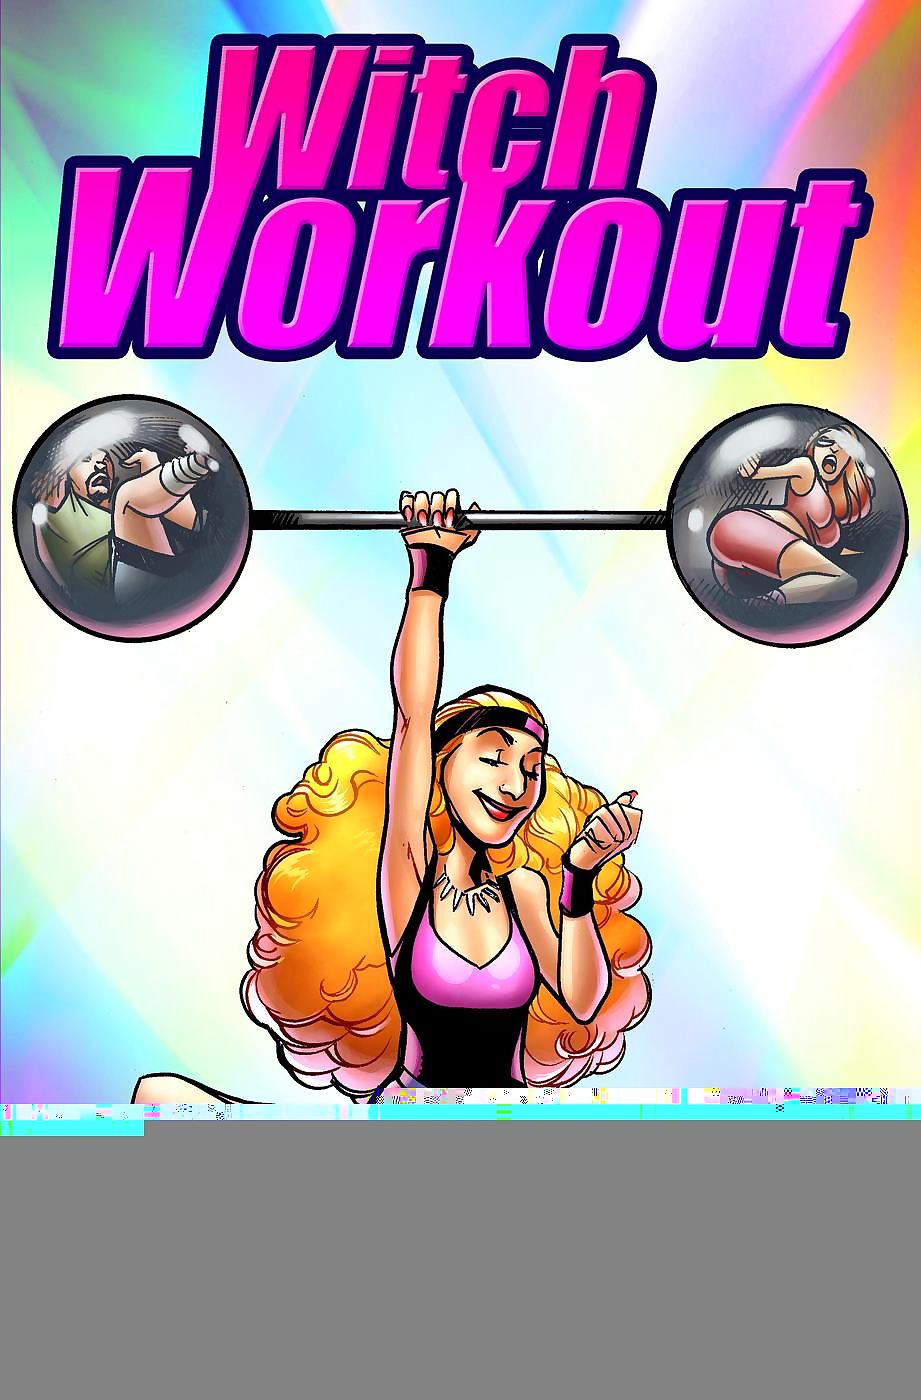 Wandrer- Witch Workout page 1